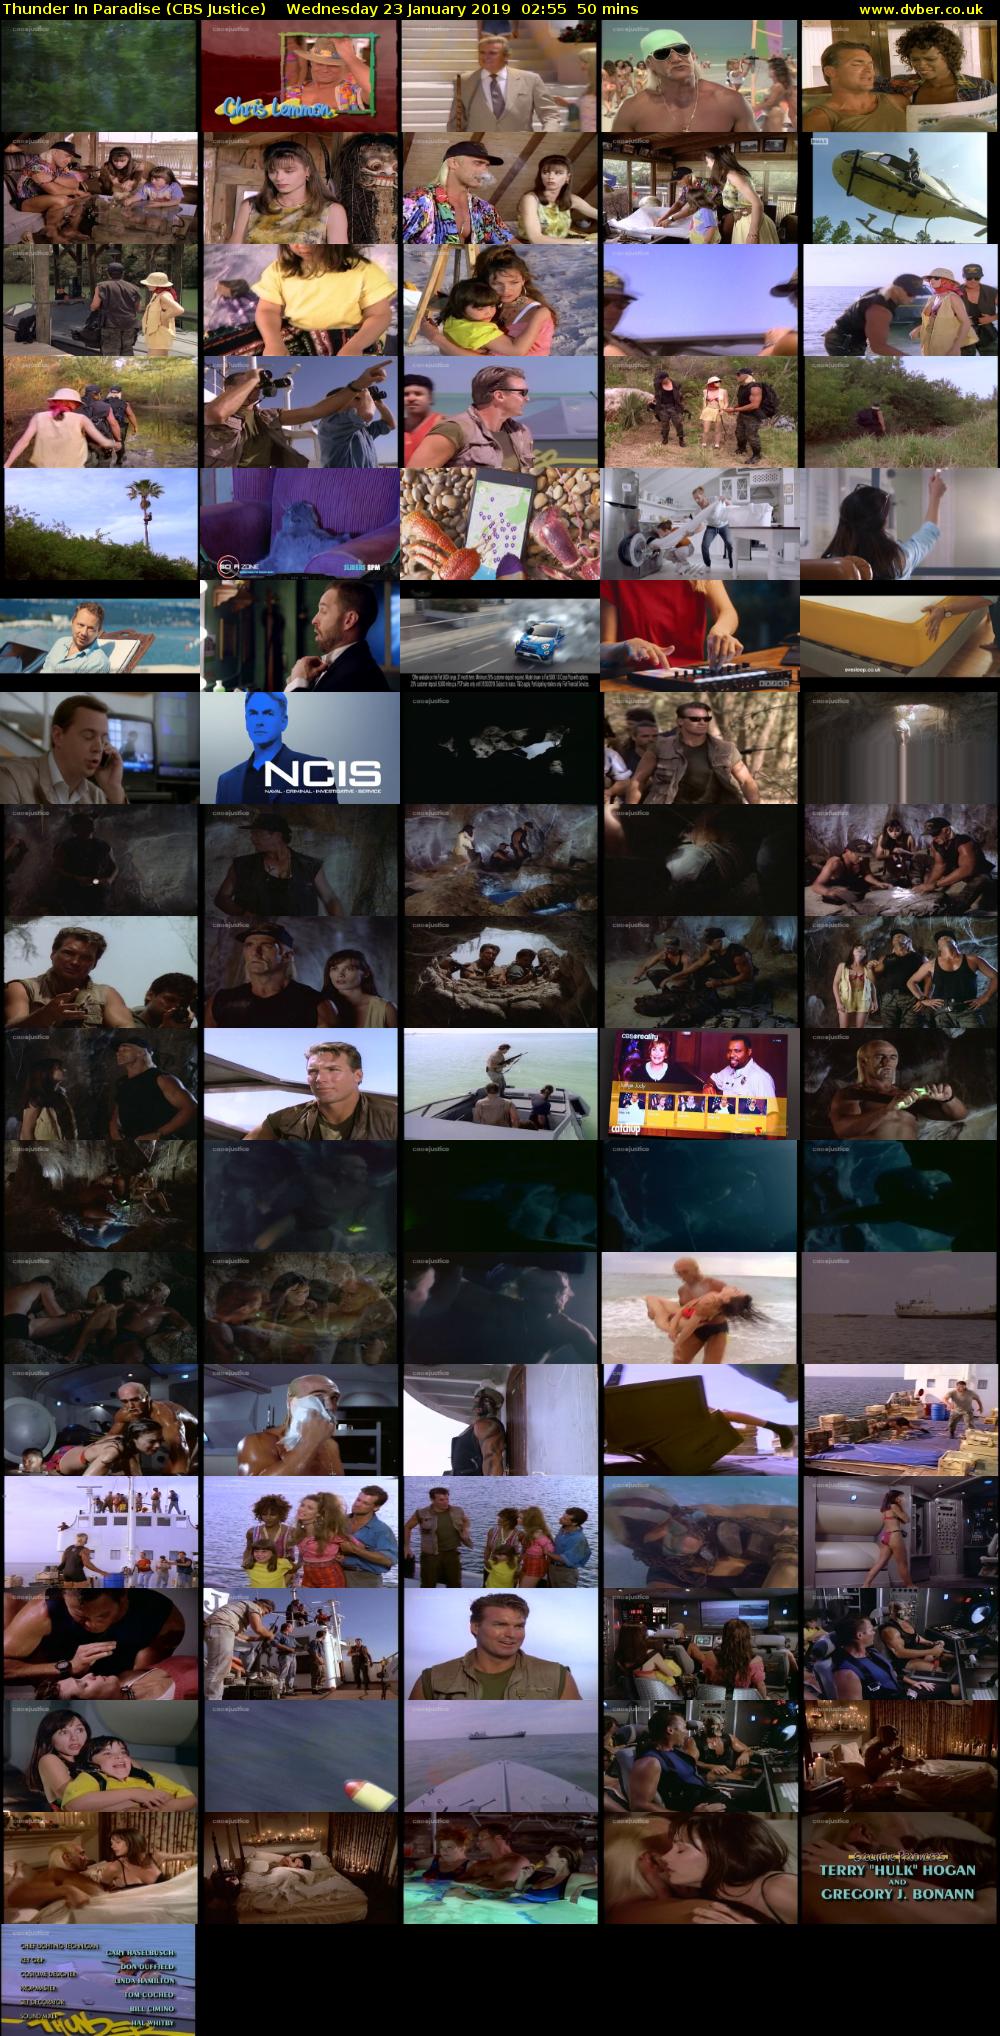 Thunder In Paradise (CBS Justice) Wednesday 23 January 2019 02:55 - 03:45